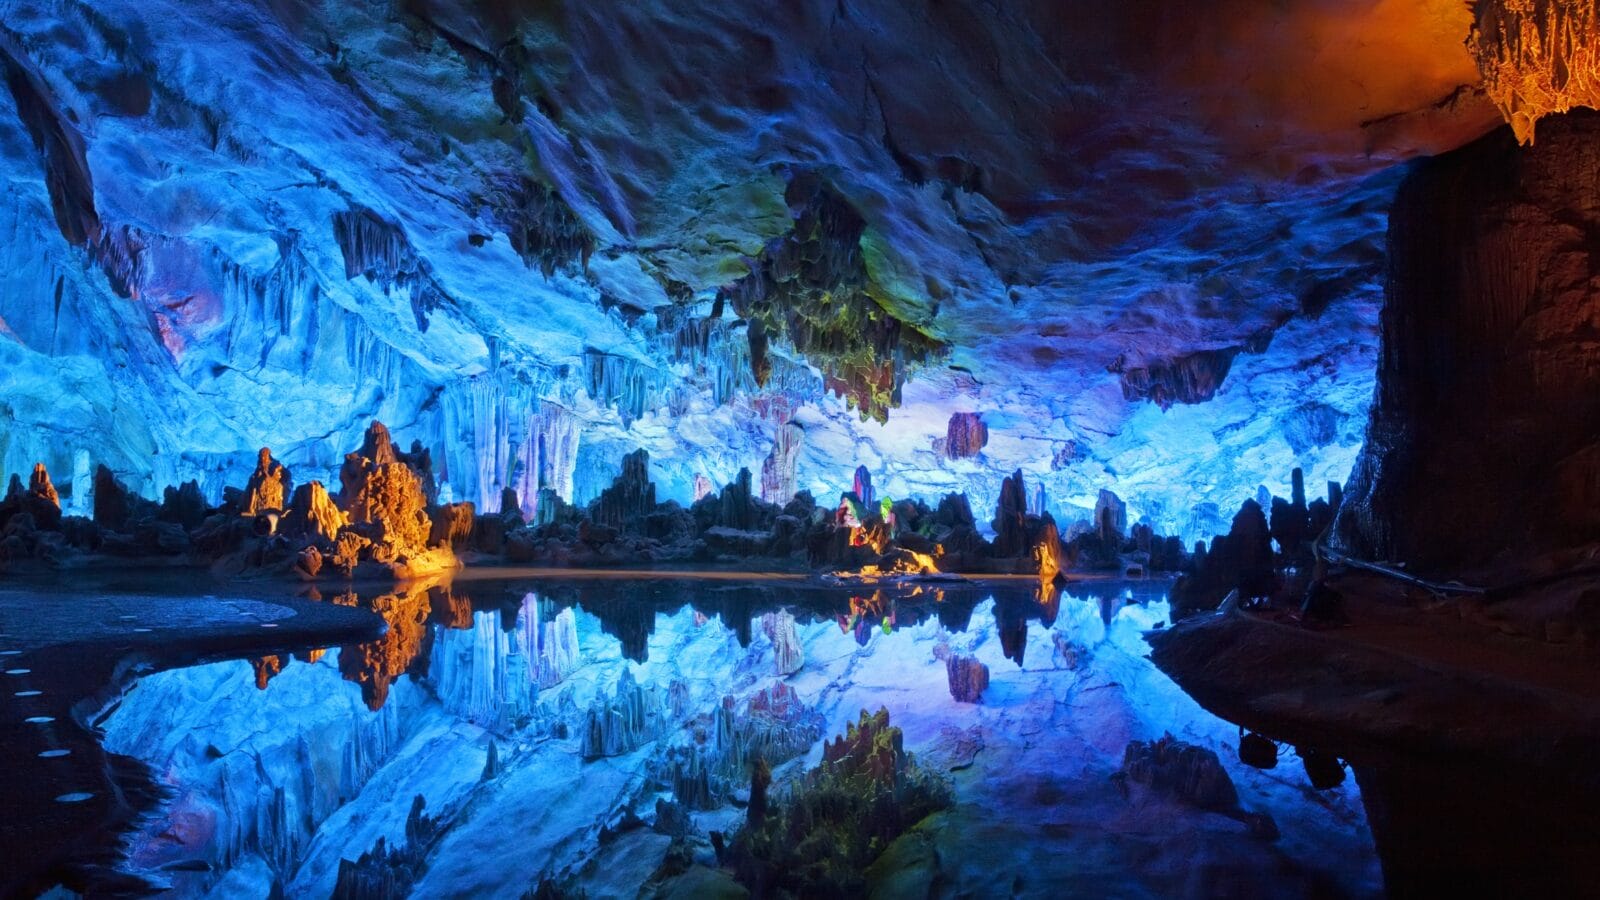 <p>Also known as the Palace of the Natural Arts, China’s Reed Flute Cave is named after the reeds growing outside the cave. Inside the cave, walls of limestone formations are decorated by ancient inscriptions dating to the 8<sup>th</sup> century BCE.</p><p>The well-maintained cave is a pleasure to walk through and has magical vibes thanks to its multicolored lighting.</p>